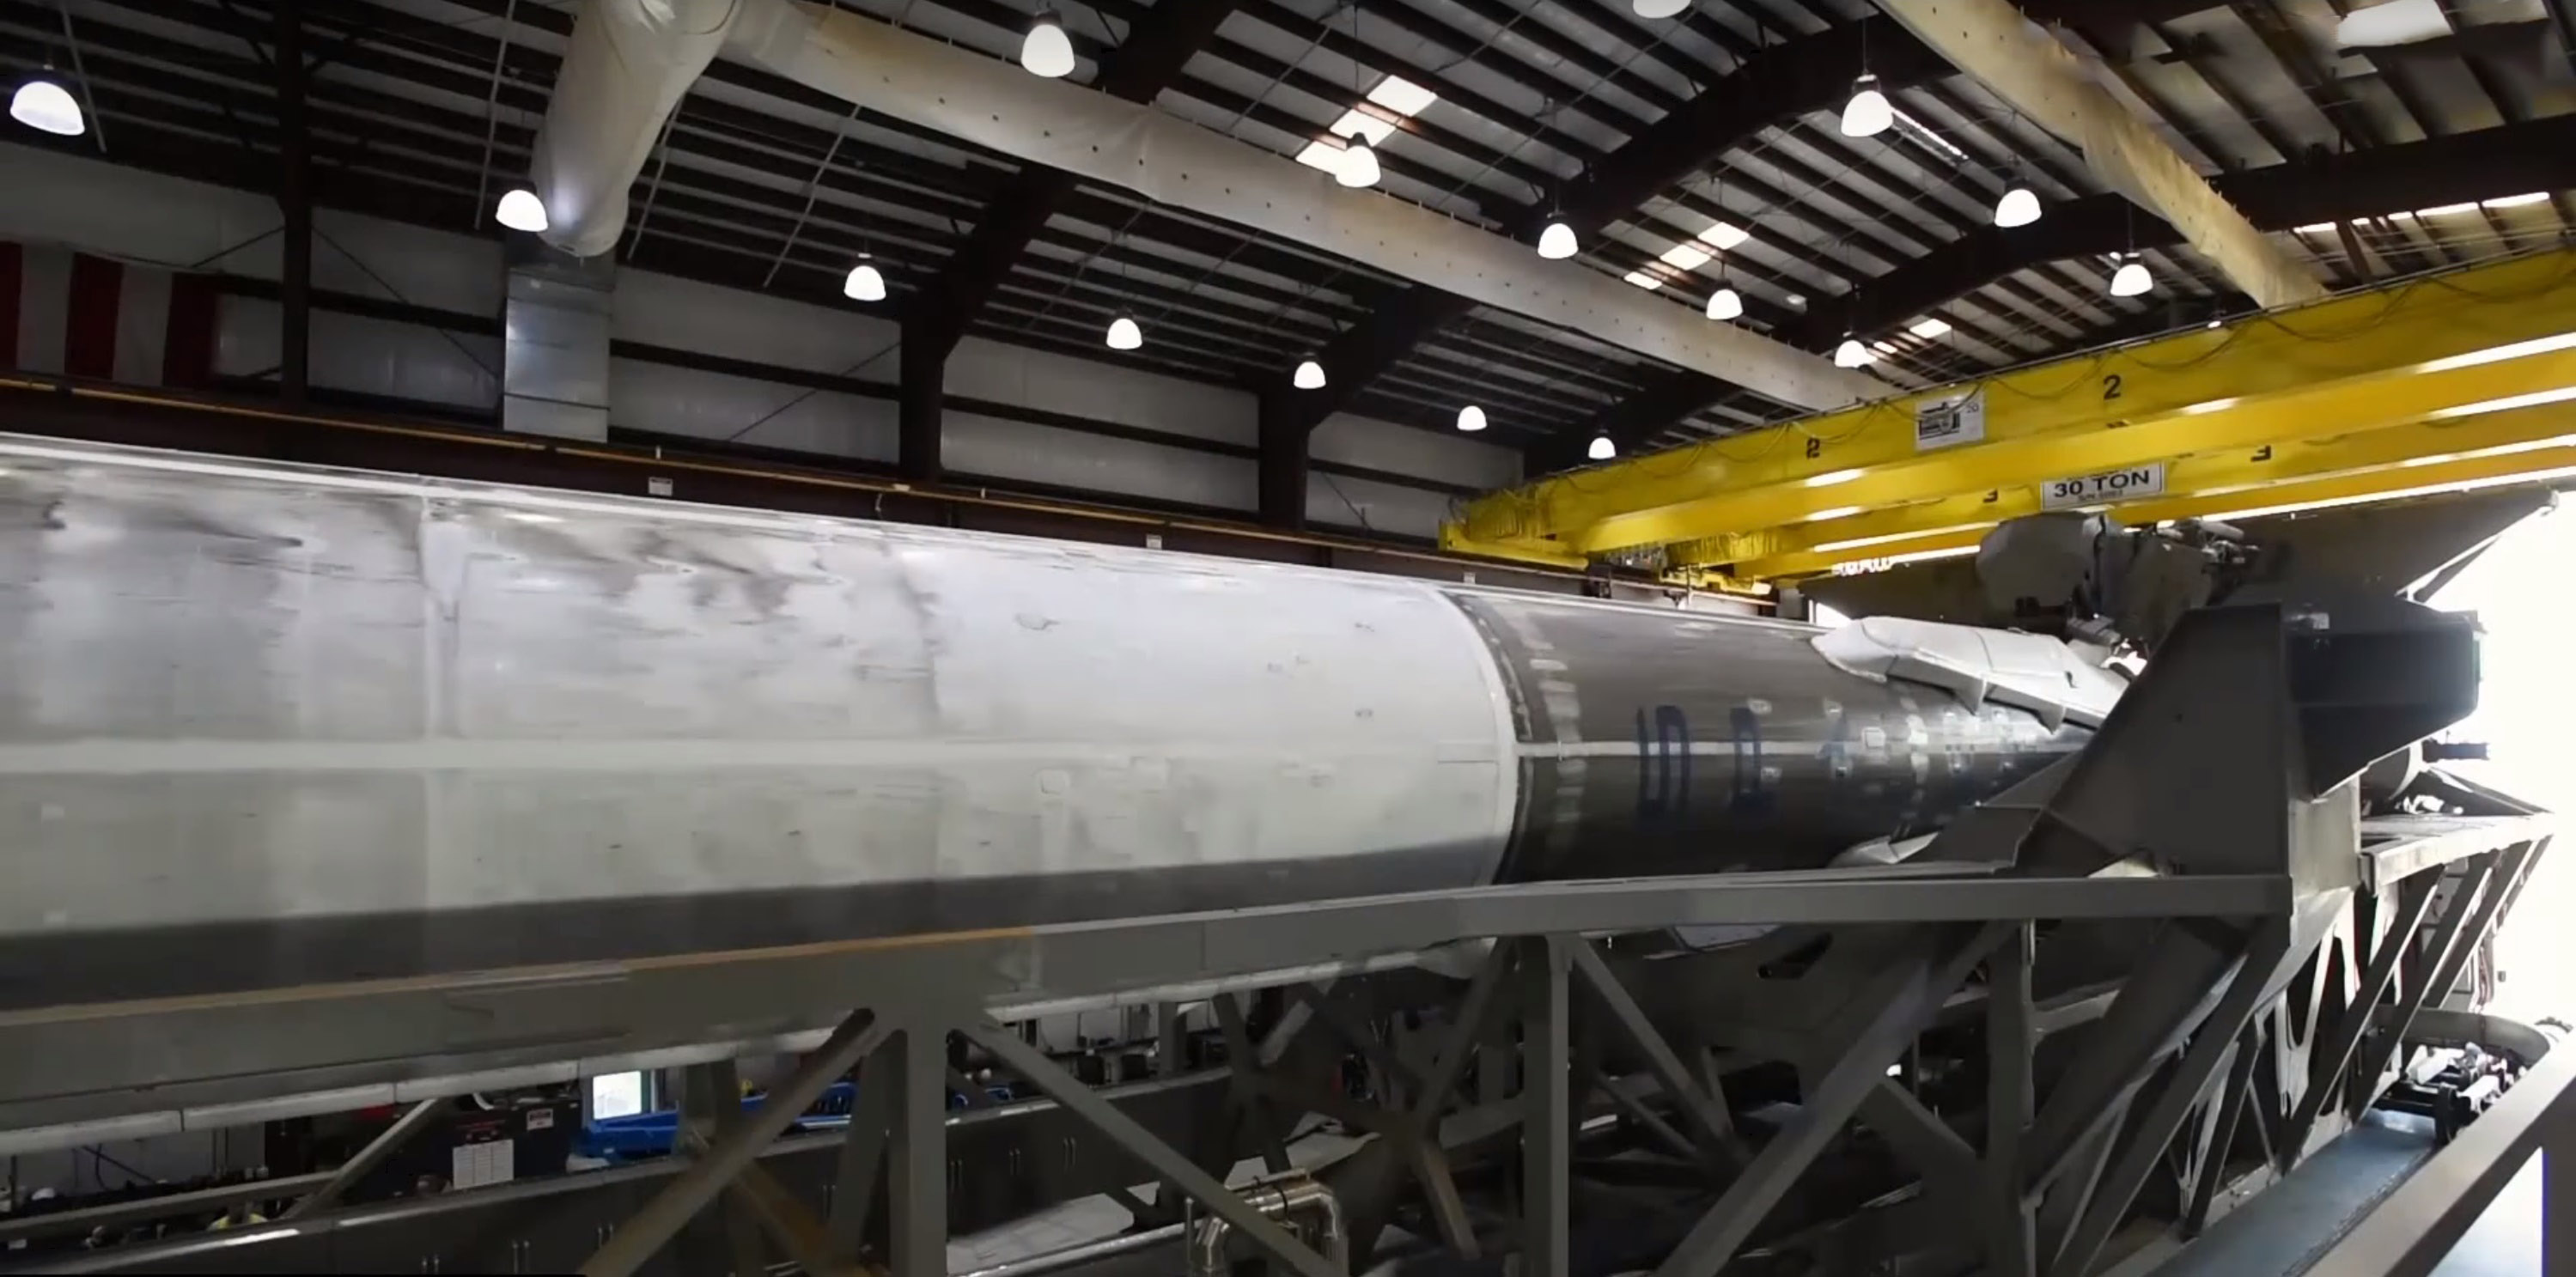 1035 in LC40 HIF (SpaceX)